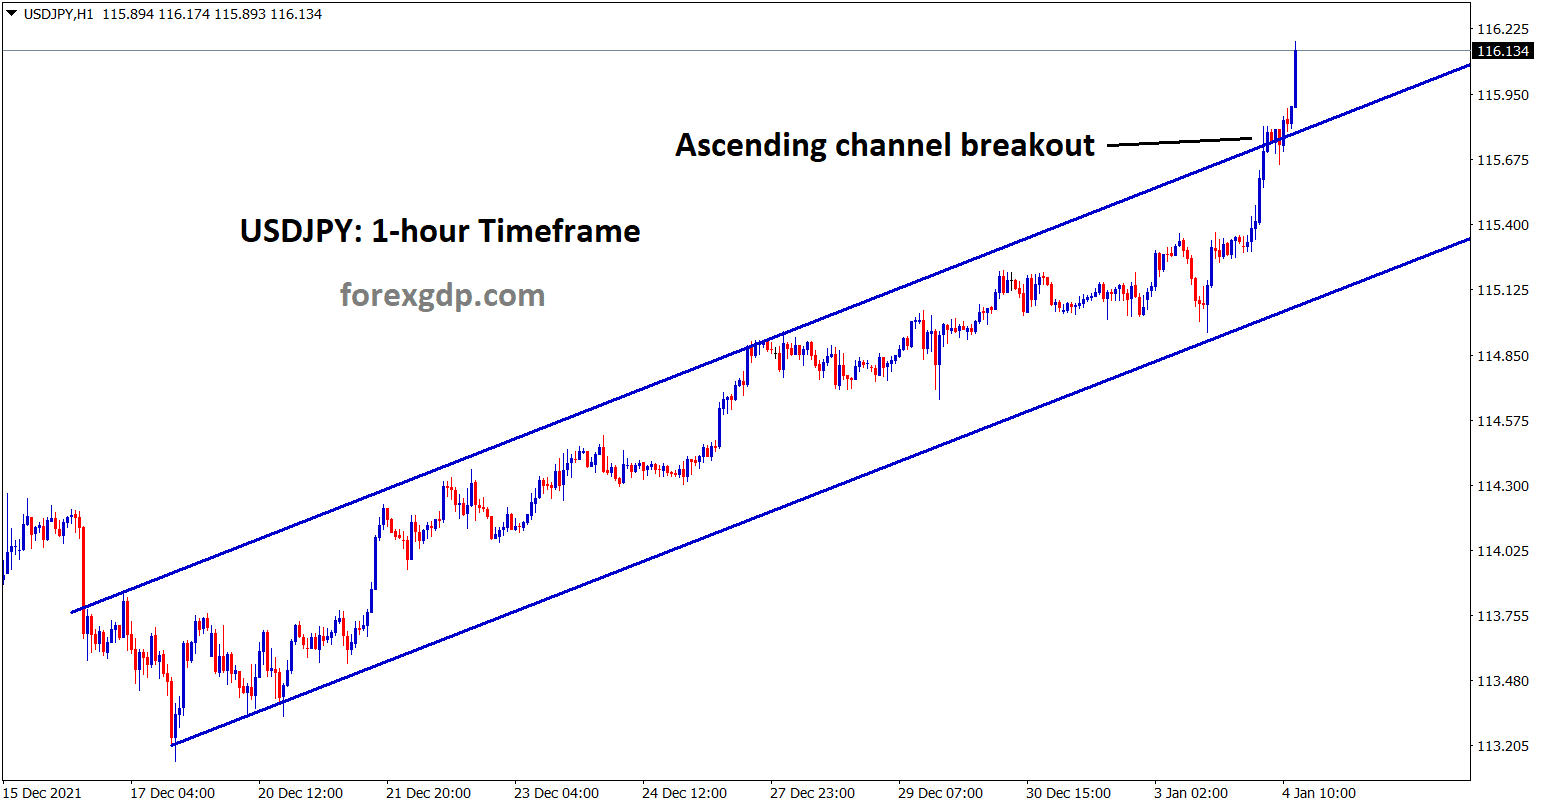 USDJPY Ascending channel breakout formed in the 1 hour timerame chart